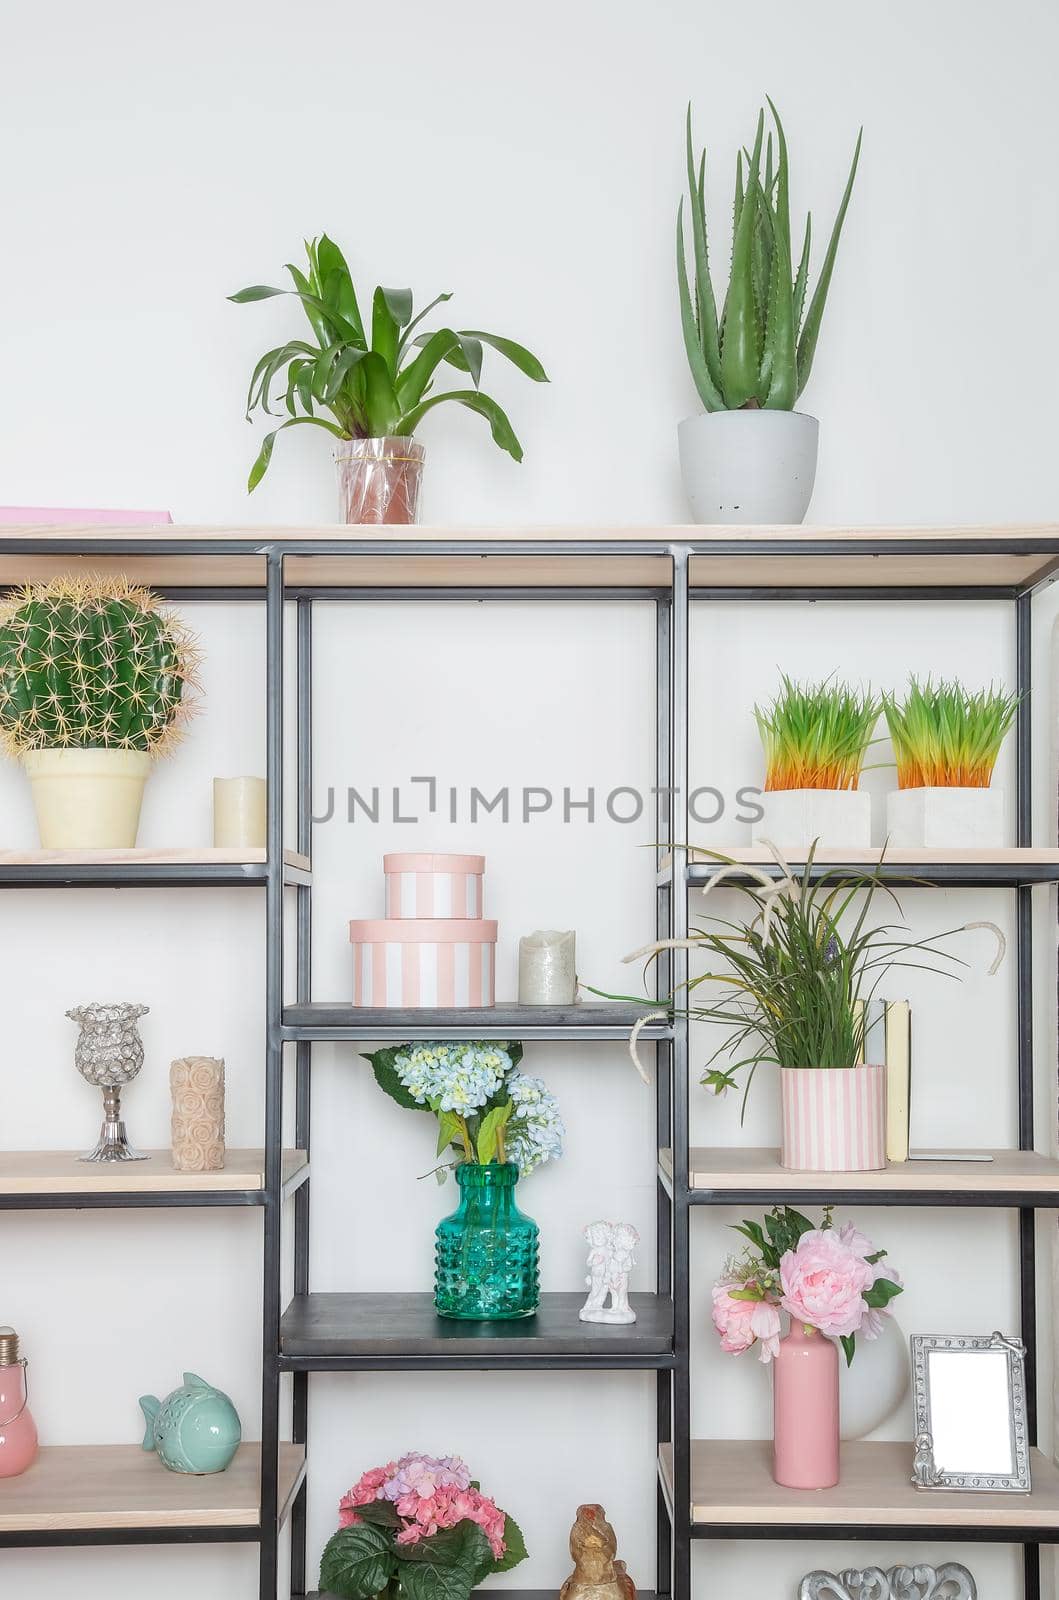 Flowers and decorative decorations on a metal rack in the style of minimalism by galinasharapova